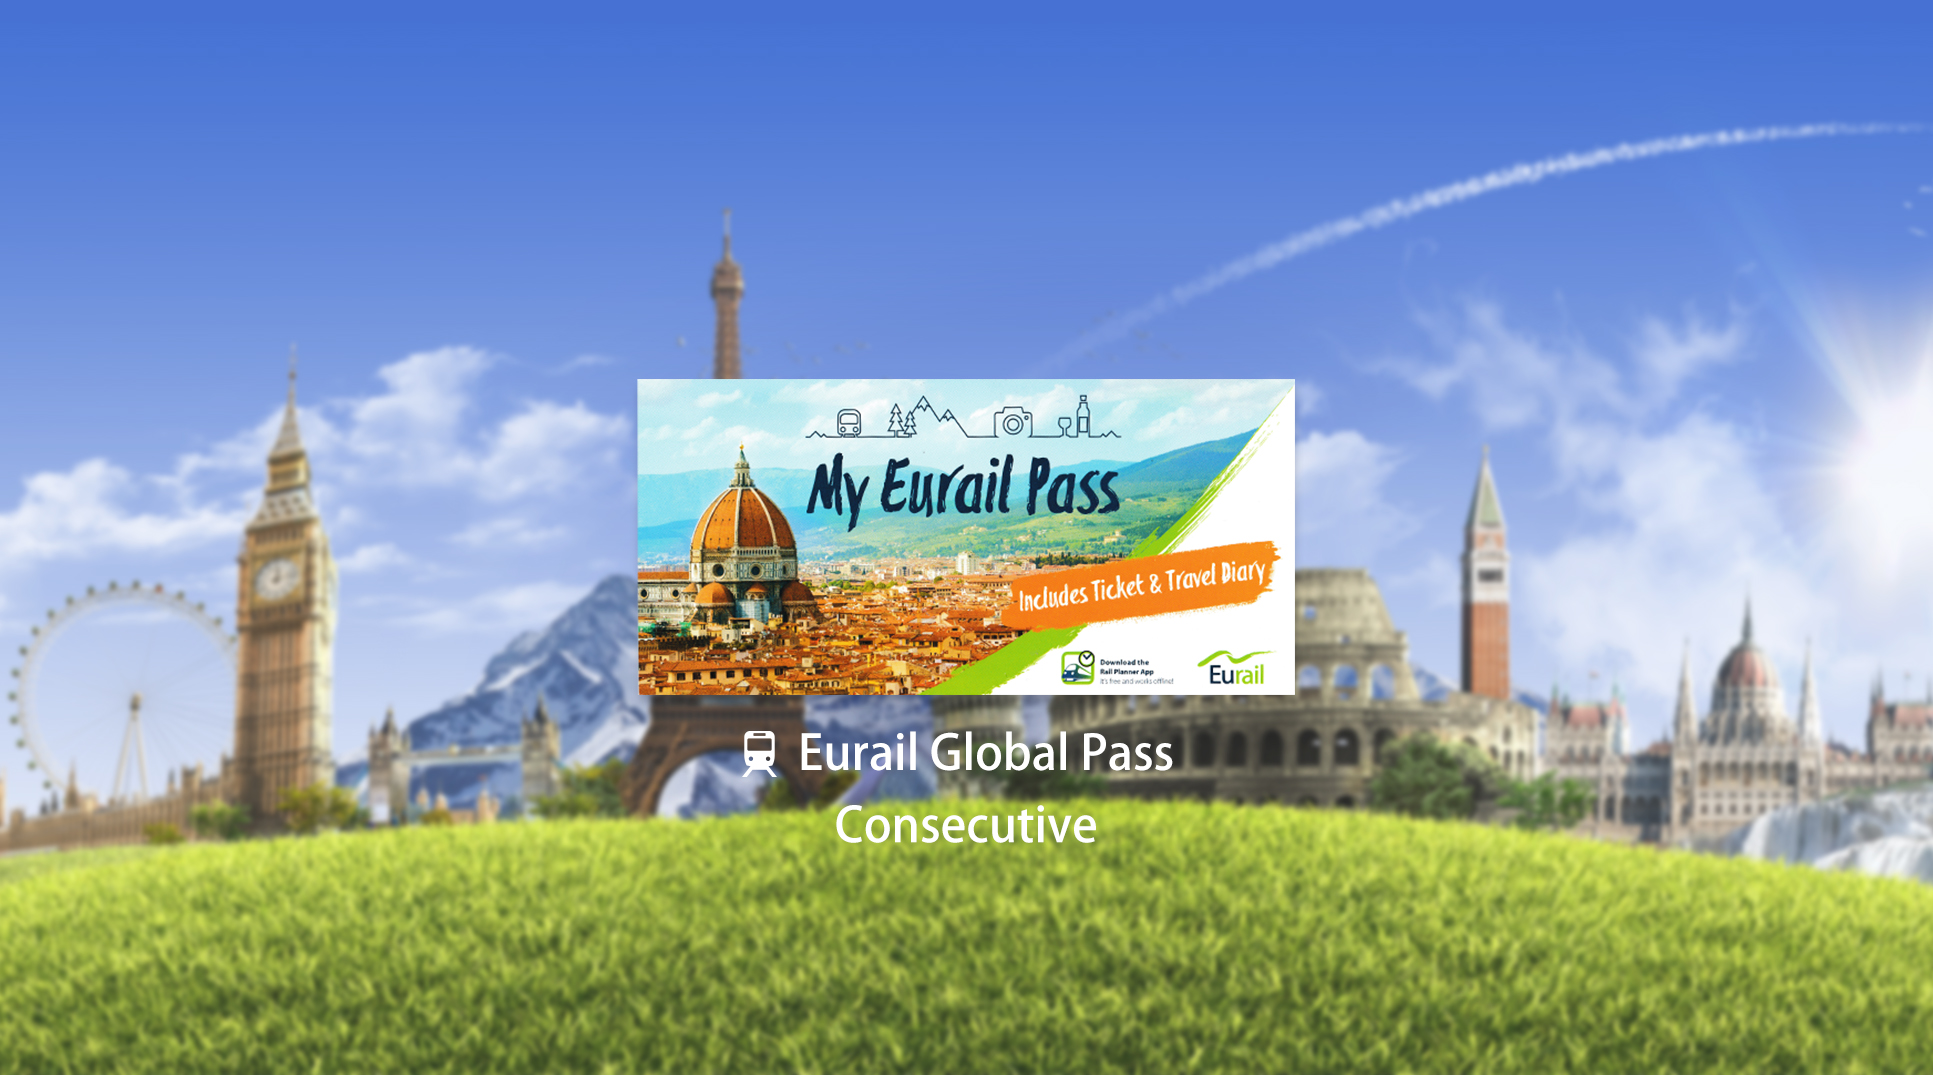 where to buy eurail pass in london